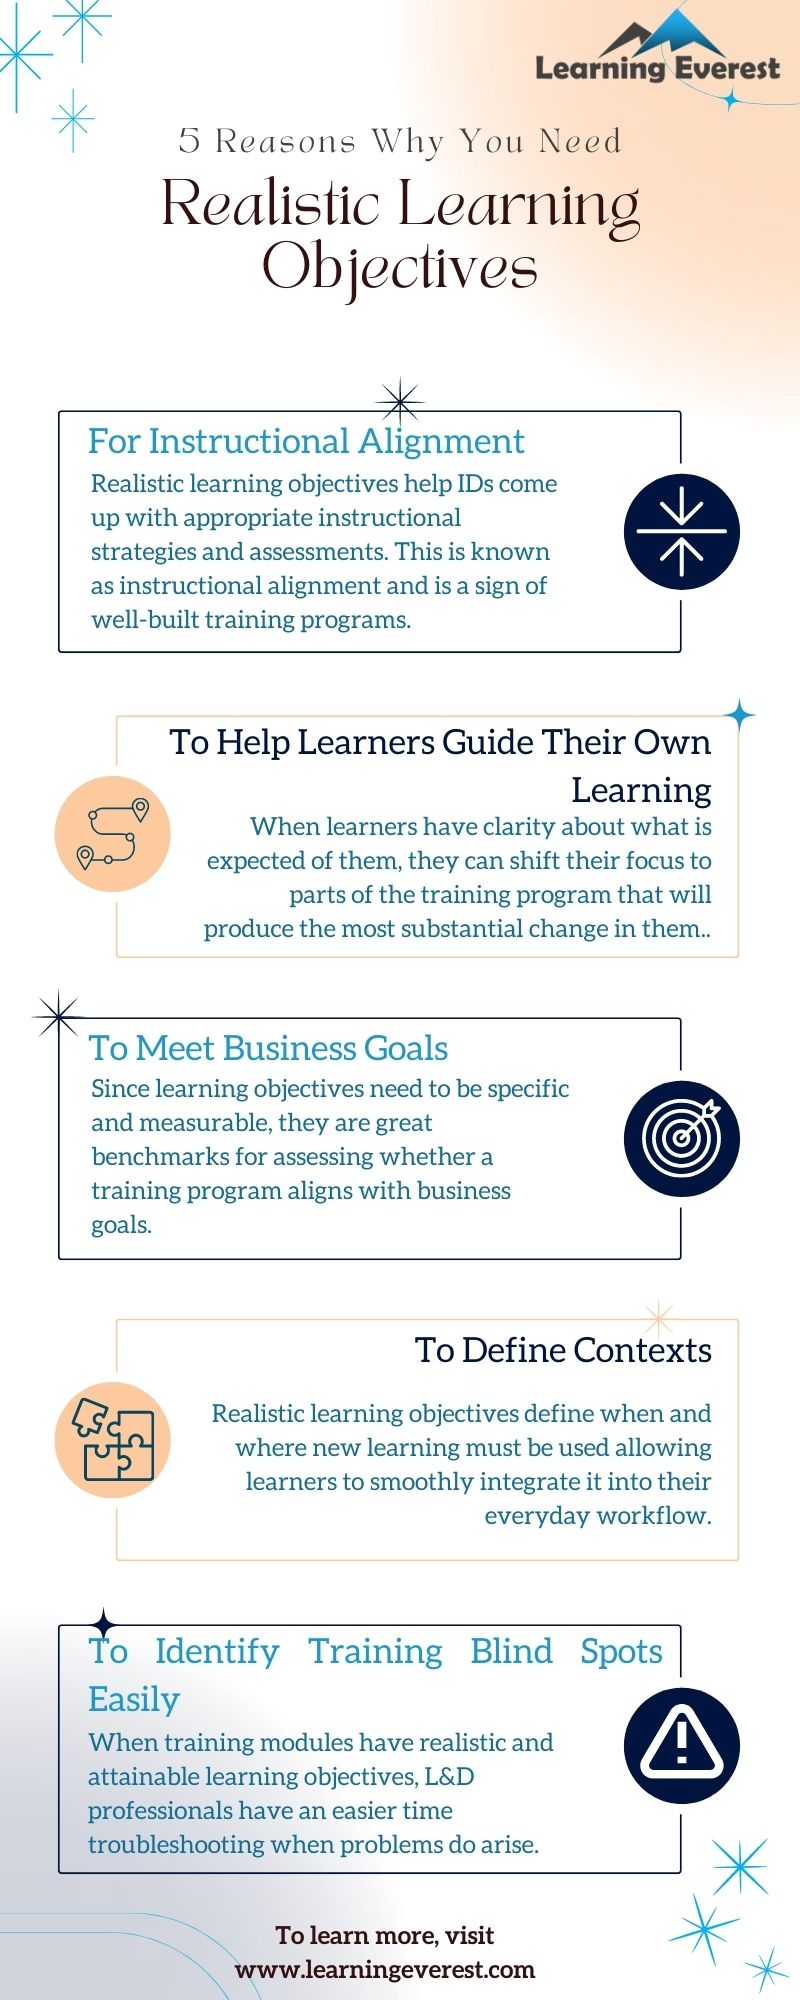 5 Reasons Why You Need Realistic Learning Objectives